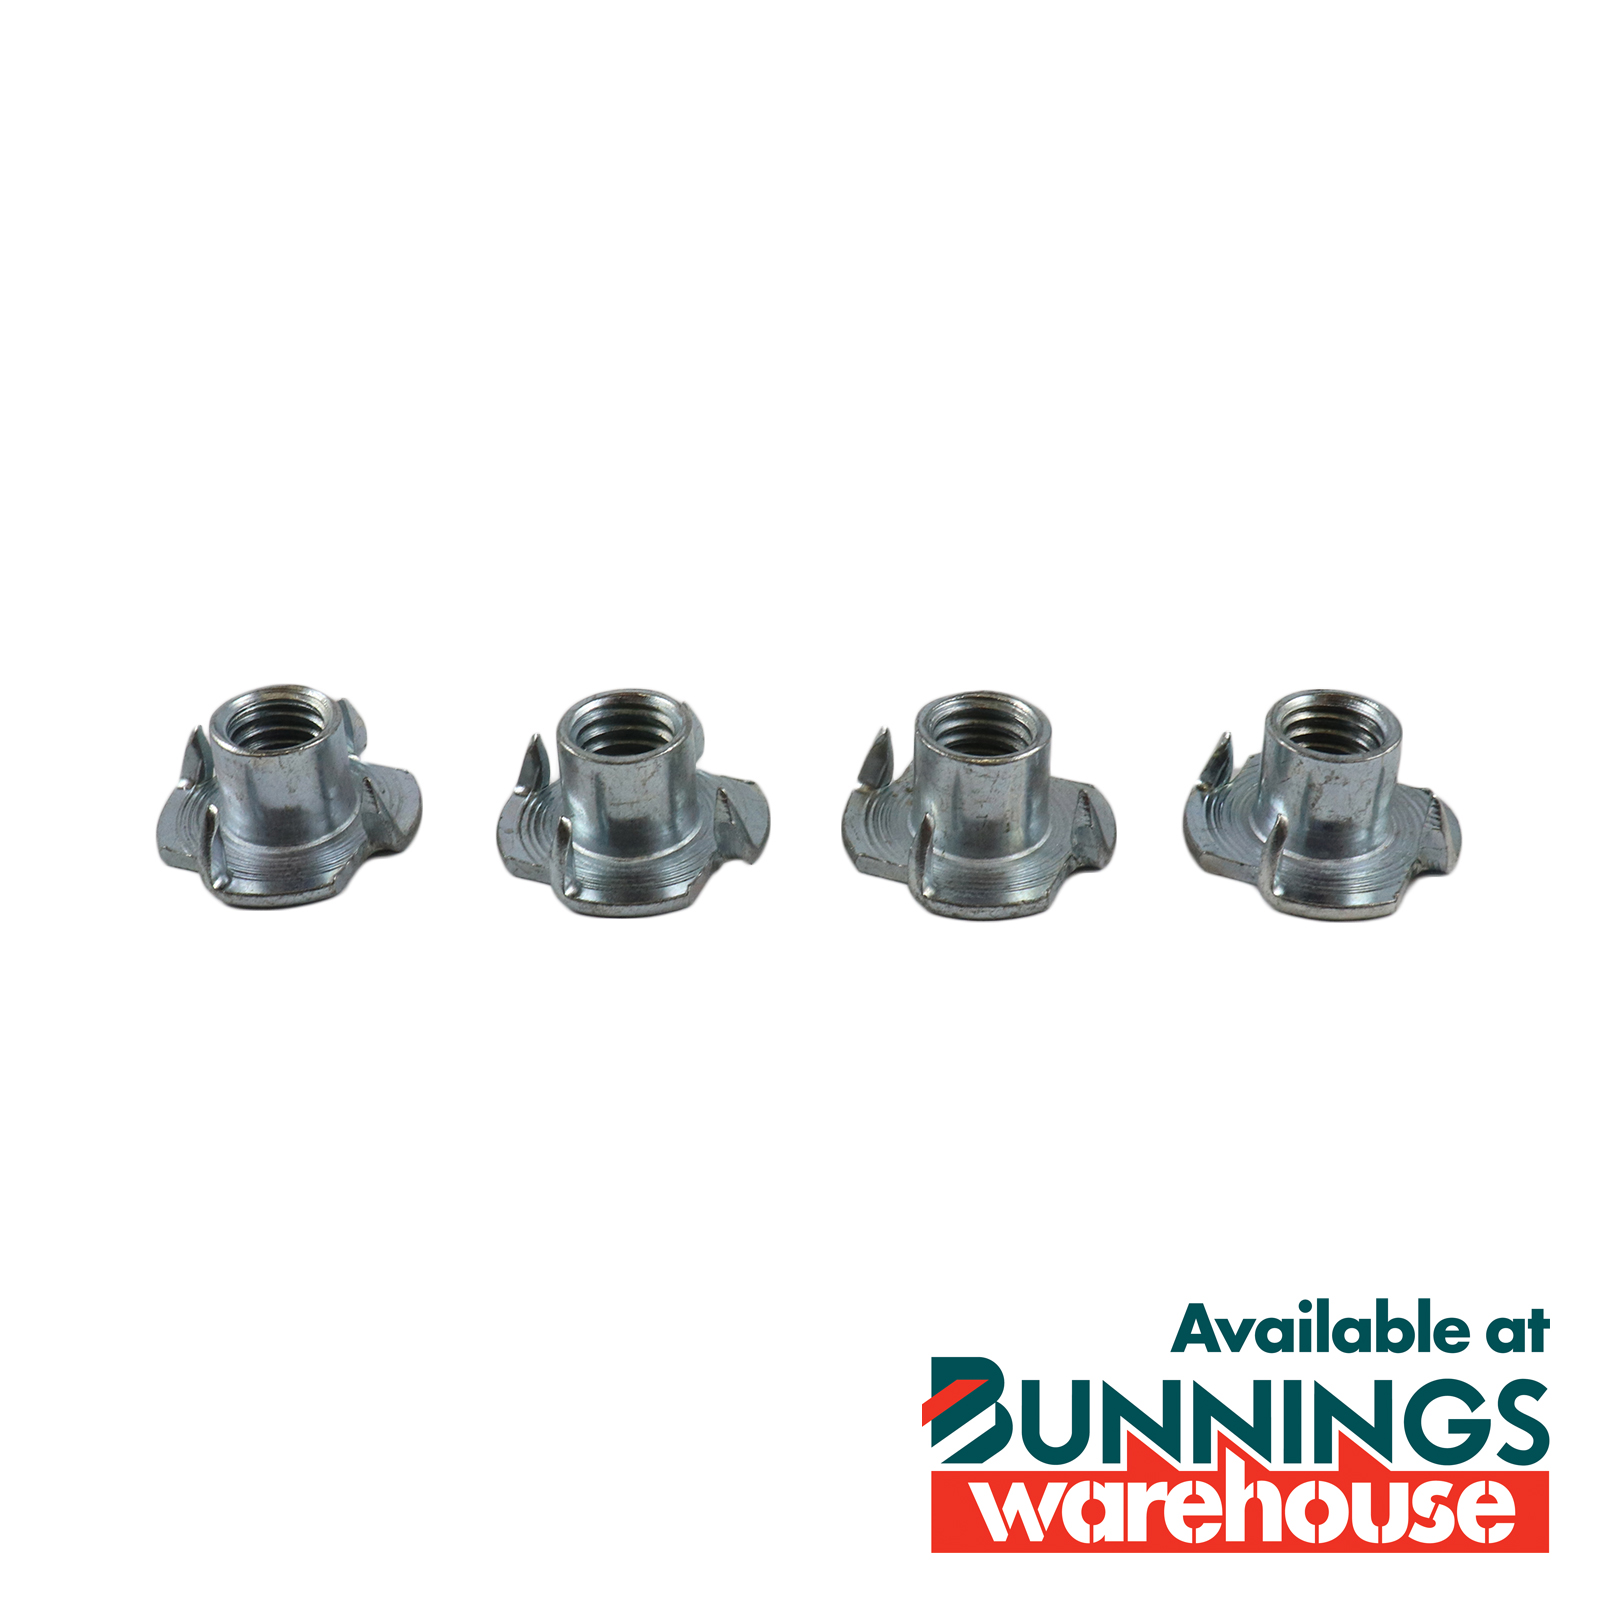 Adoored 3/8" T-Nuts 4PK